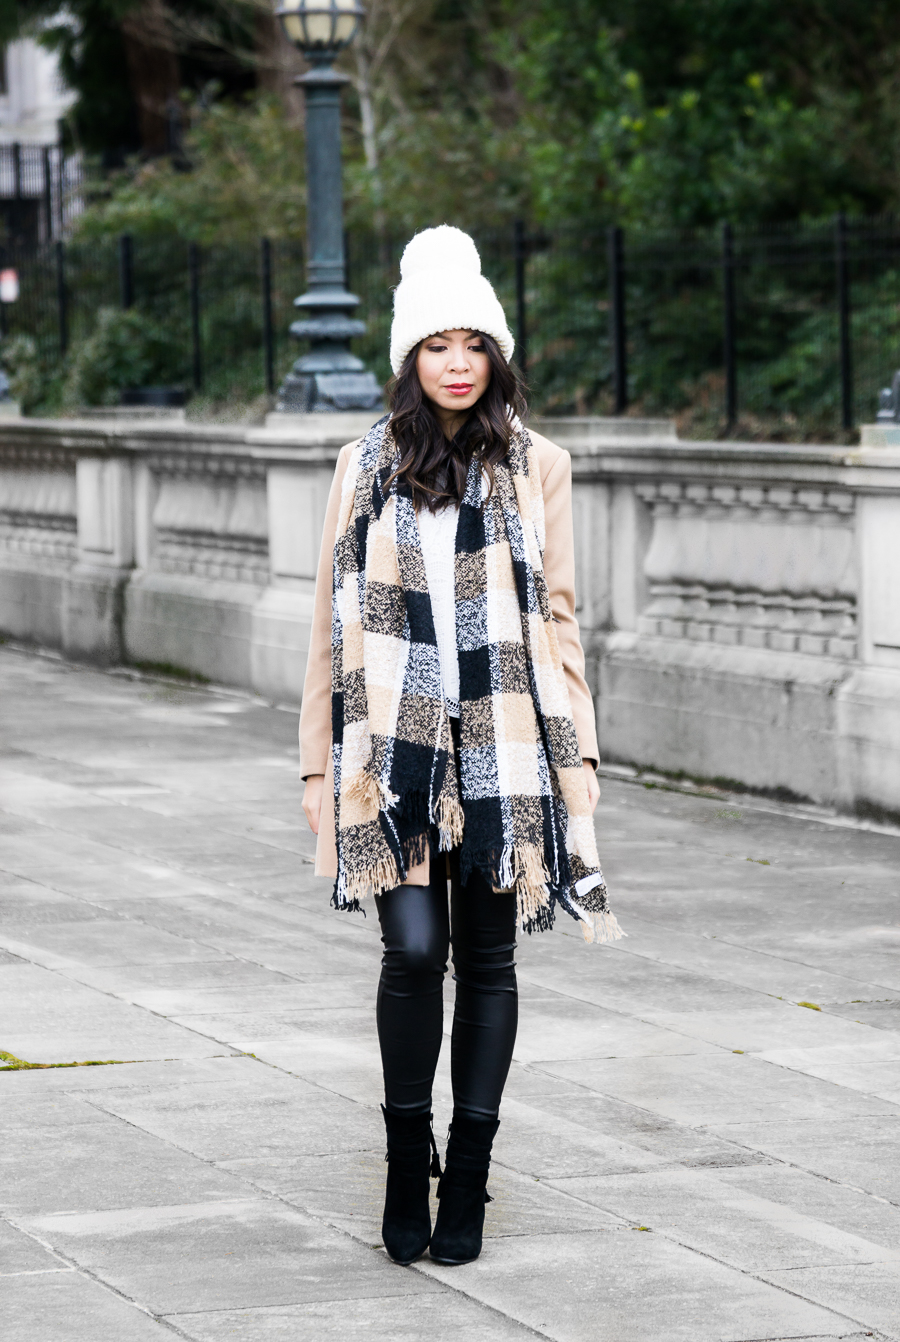 Camel coat outfit, winter chic outfit, pom pom beanie, plaid scarf, petite fashion blog